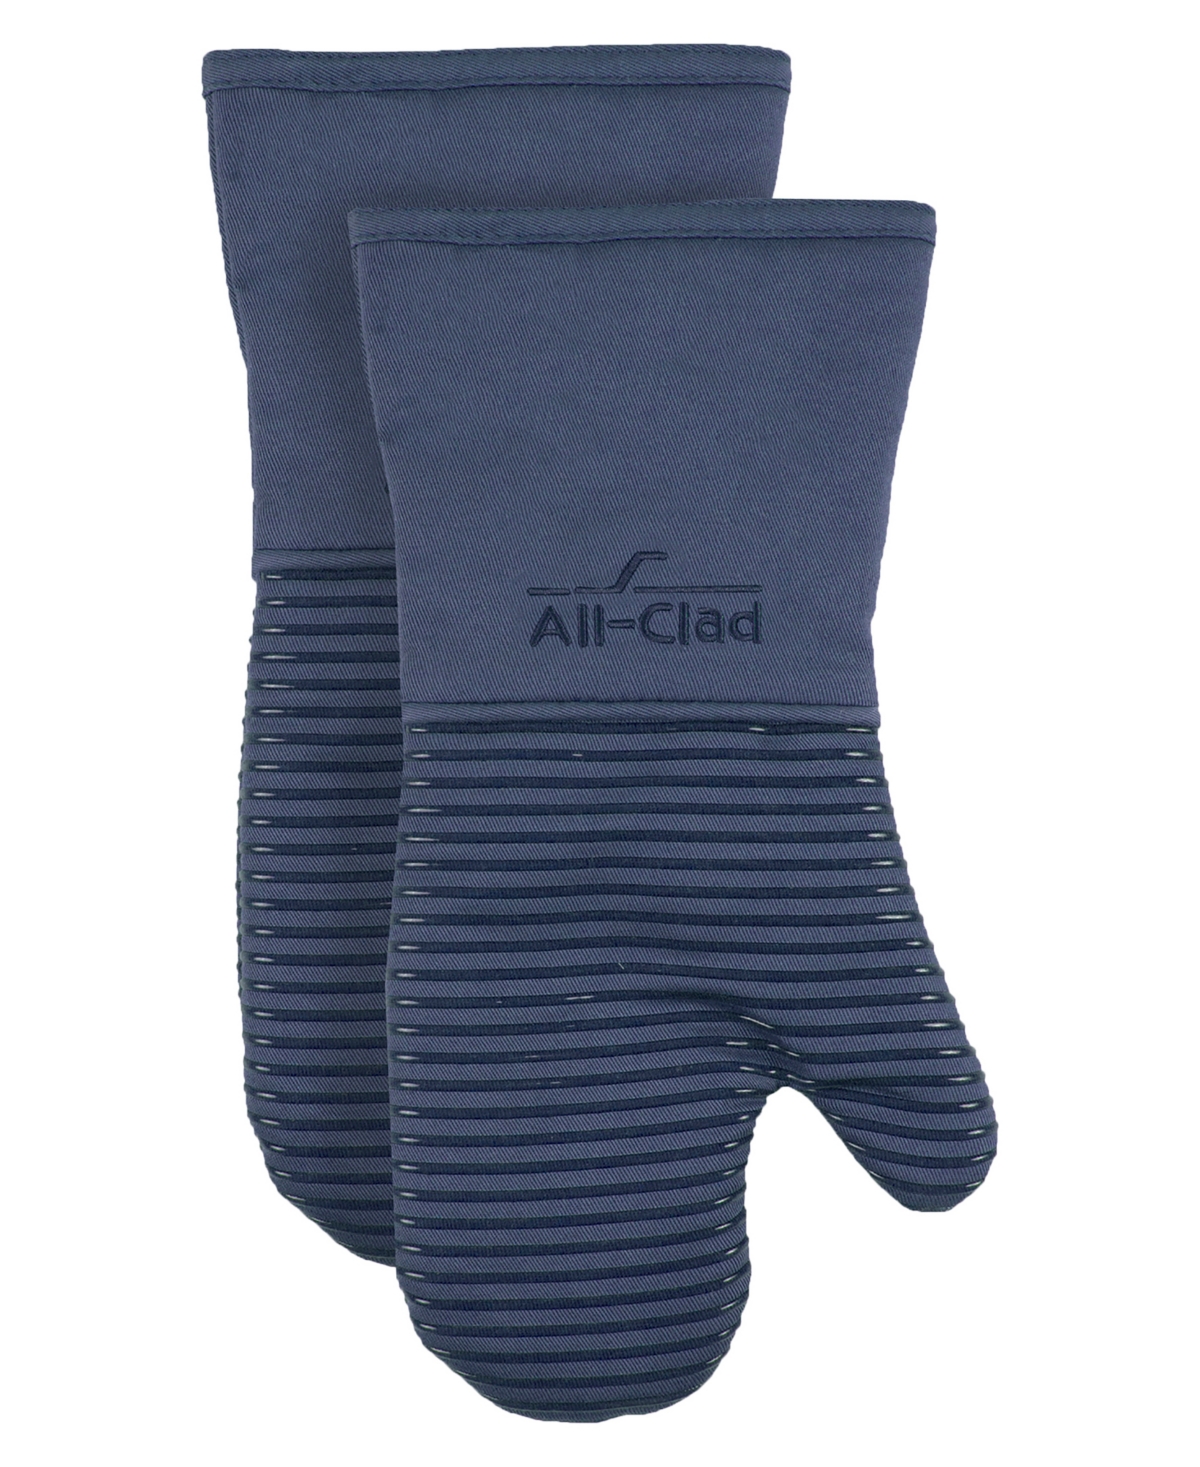 ALL-CLAD ALL-CLAD RIBBED SILICONE COTTON TWILL OVEN MITT, SET OF 2